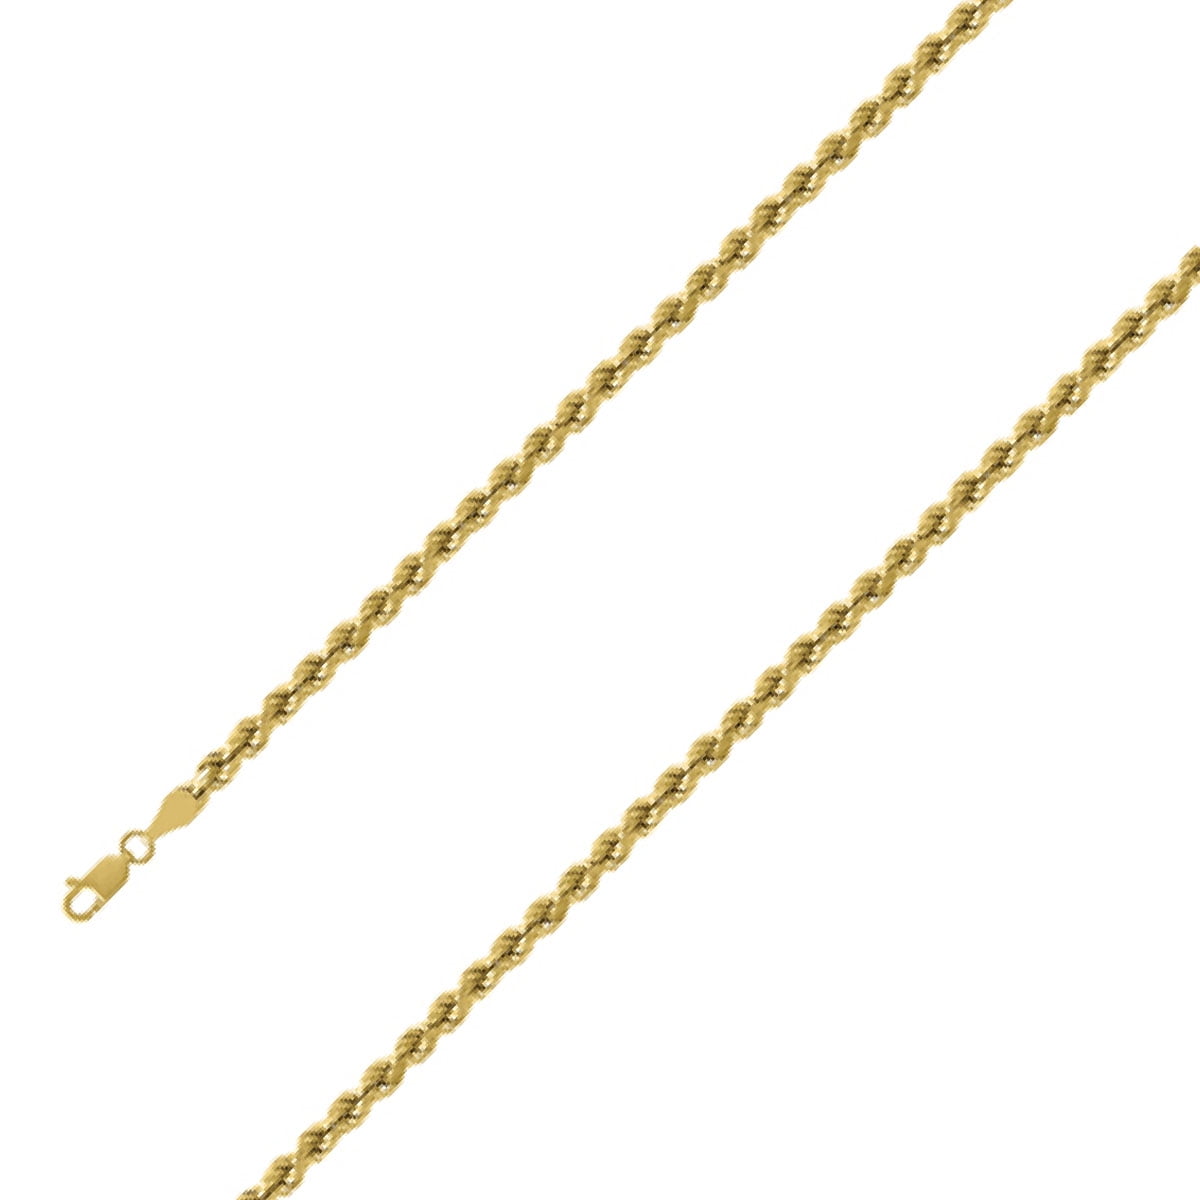 10K Italy Yellow Gold Curb Cuban Chain 20 Inches 2MM 1.9 Grams Skinny Light Hollow 